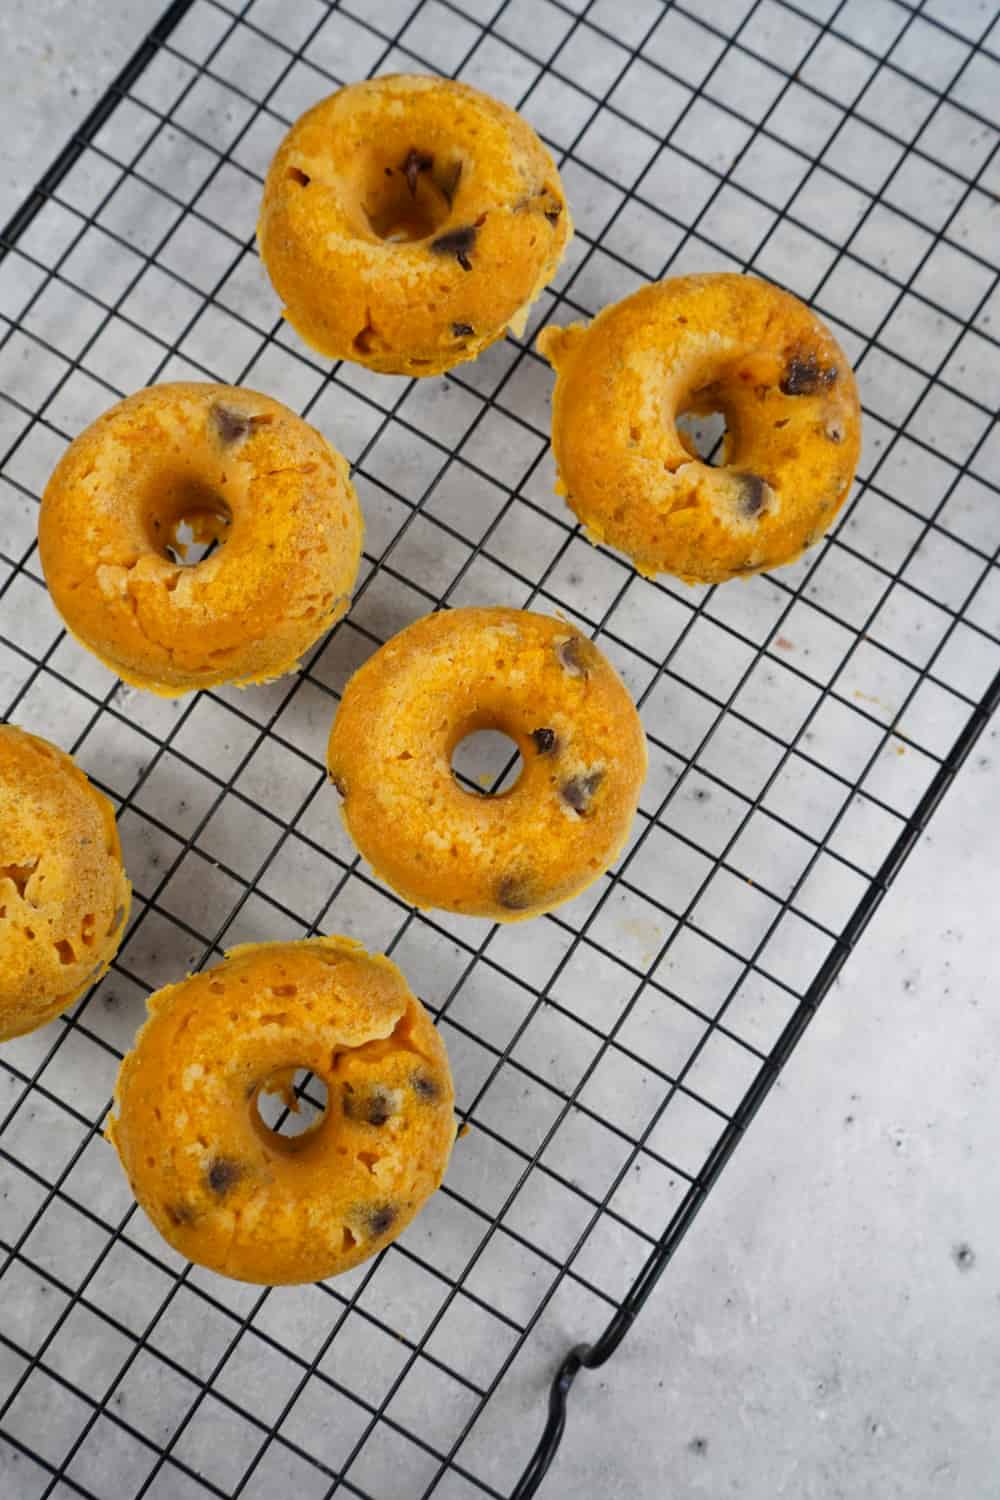 Cake mix donuts after baked